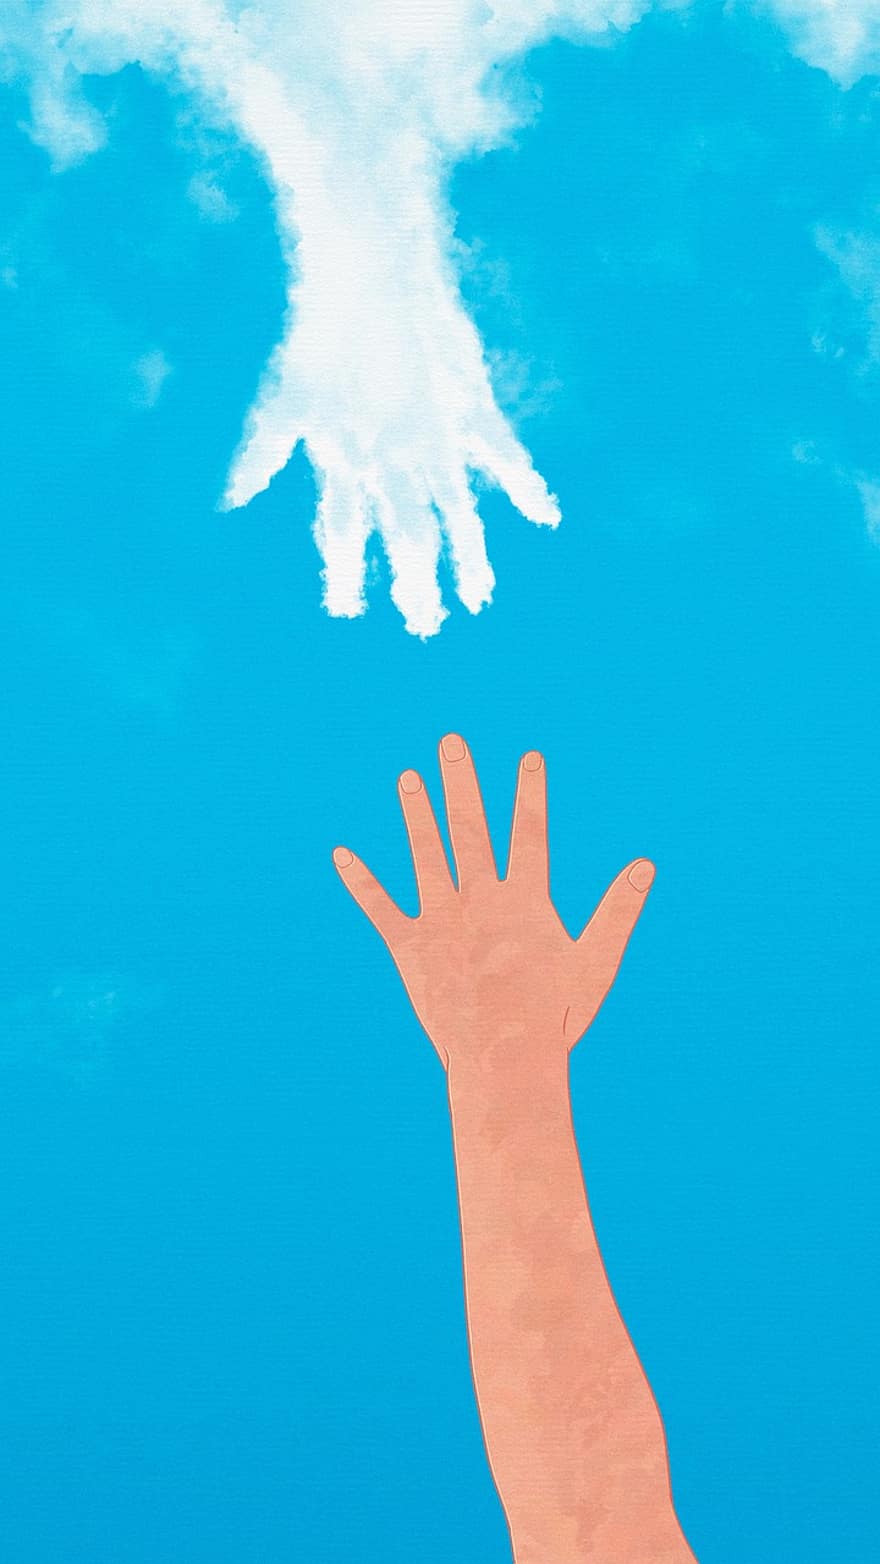 Painting, Fantasy, Hand, Hand In Hand, Cloud, Catch, Connection, Blue Fantasy, Blue Painting